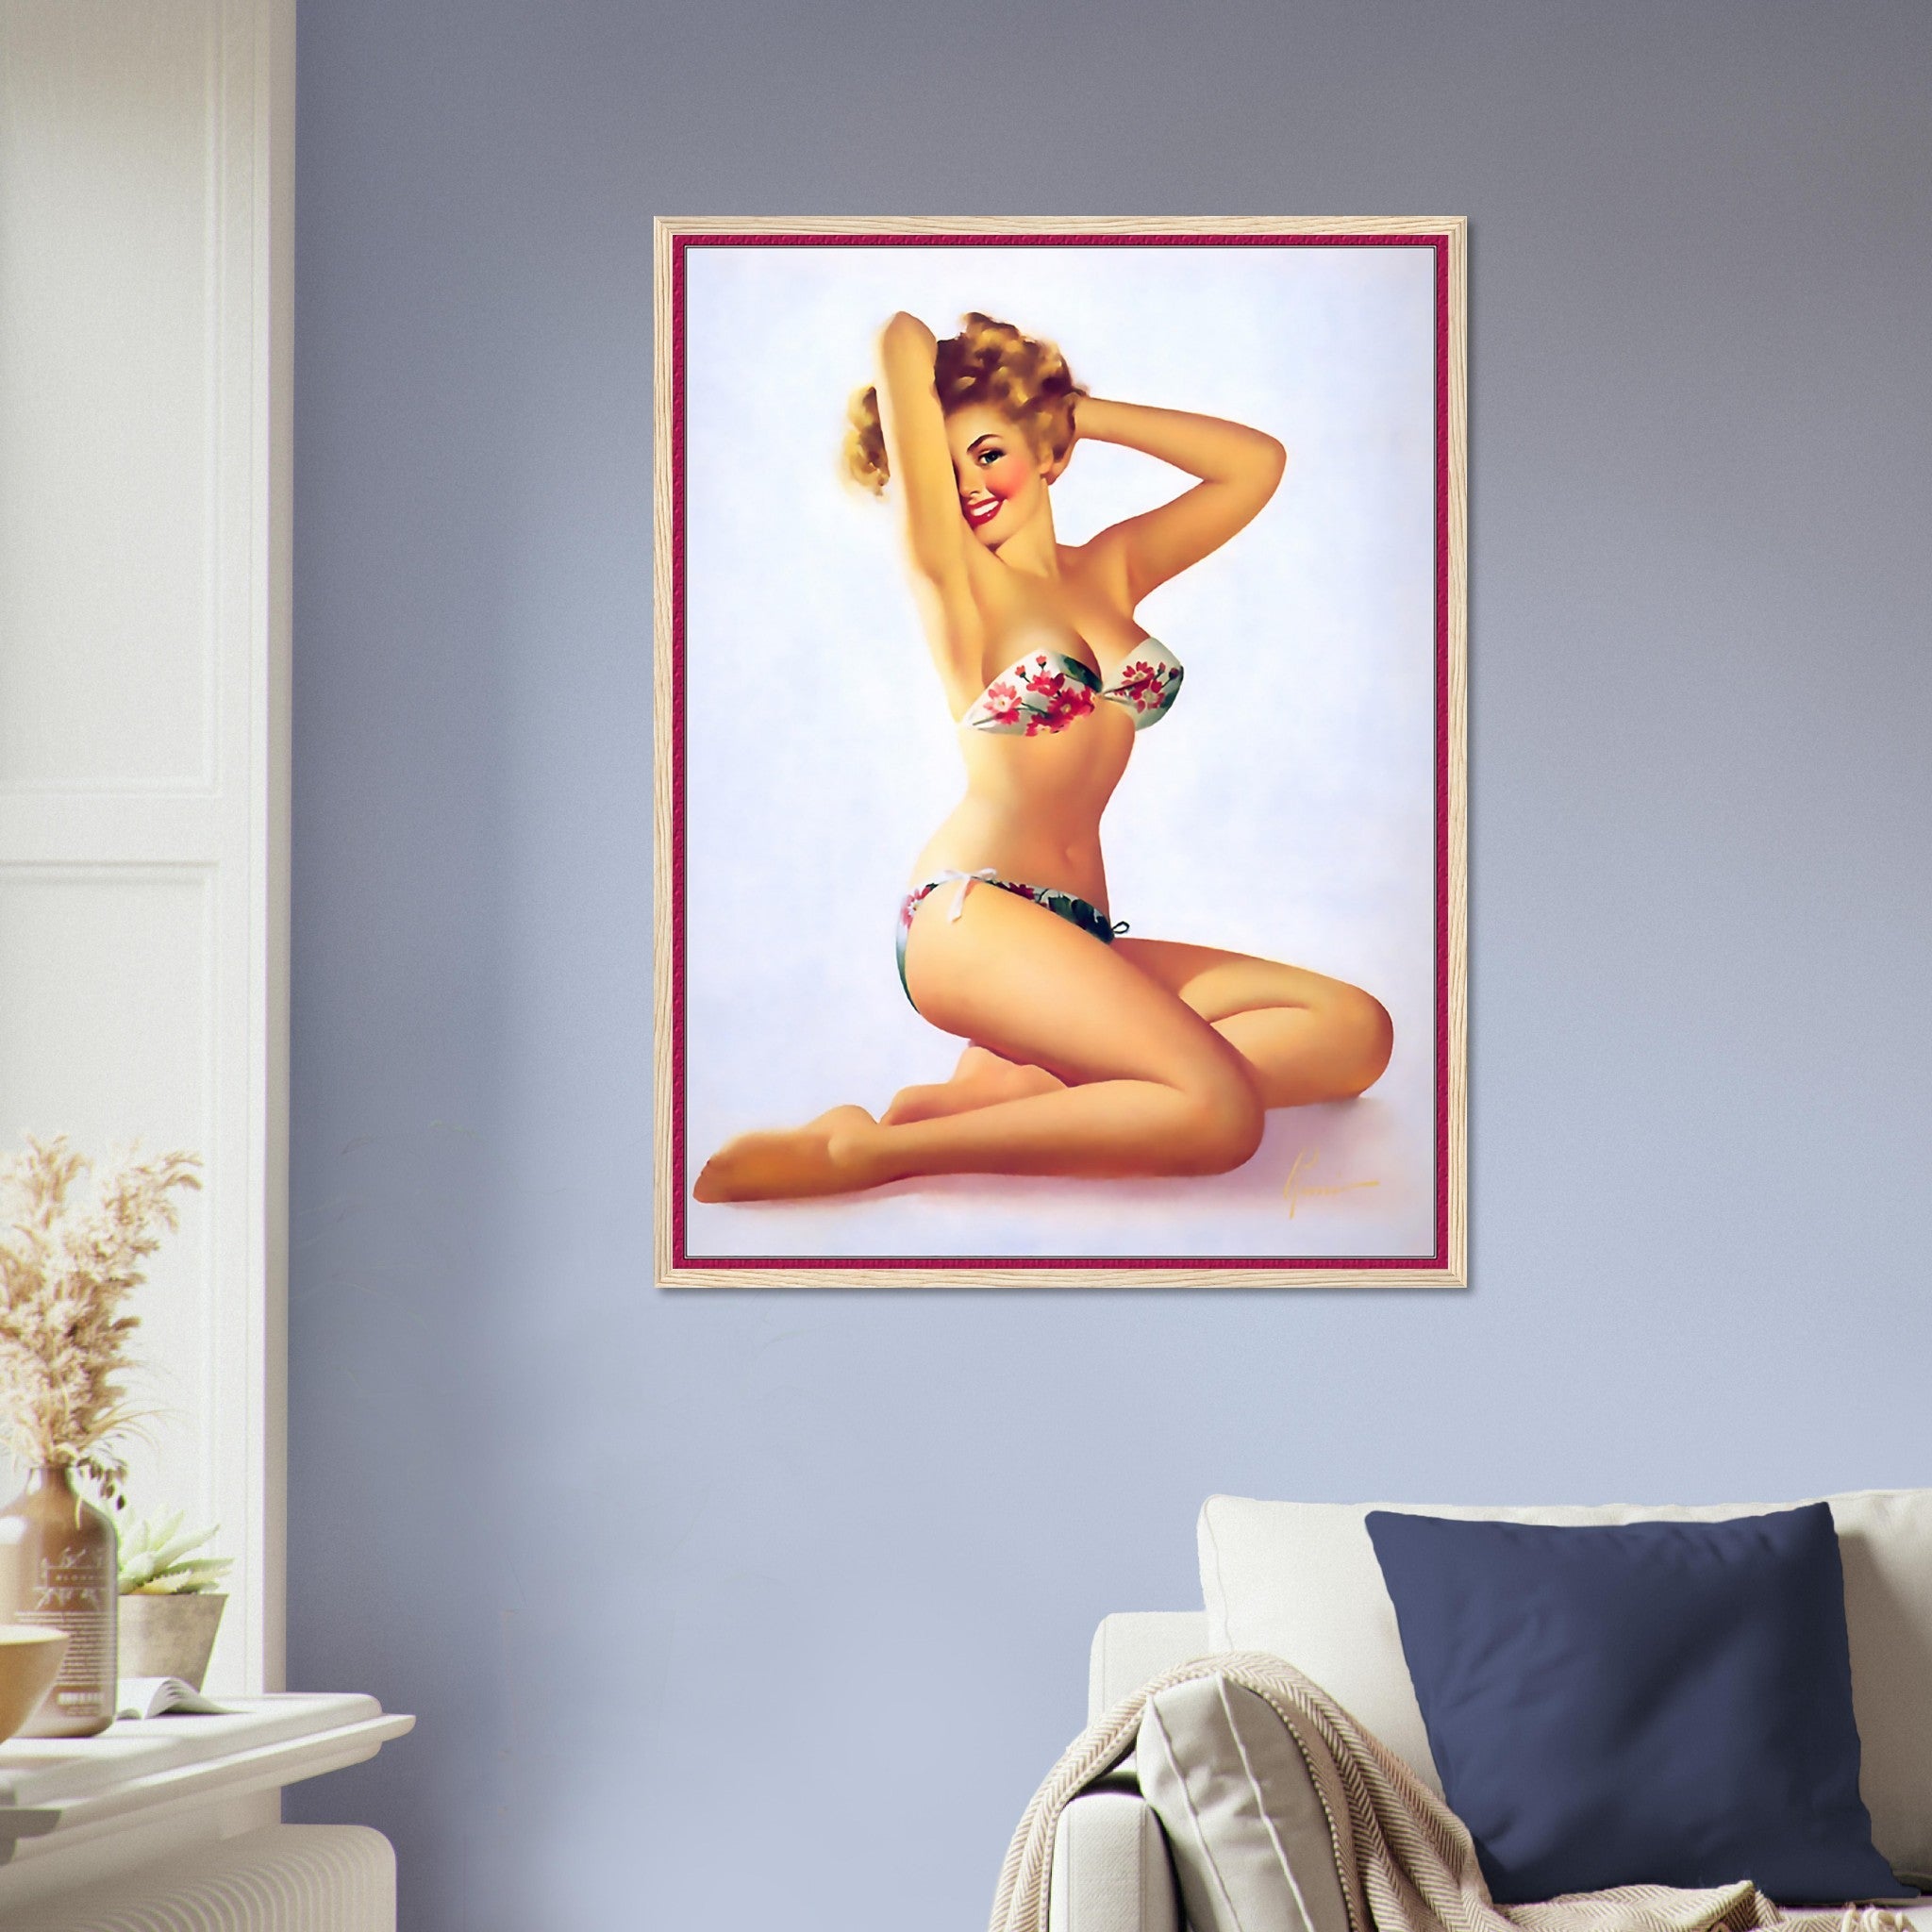 Vintage Pin Up Girl Framed, Red Flowers On Bikini - Edward Runci - Vintage Art - Retro Pin Up Girl Framed Print - Late 1940'S - 1950'S - WallArtPrints4U